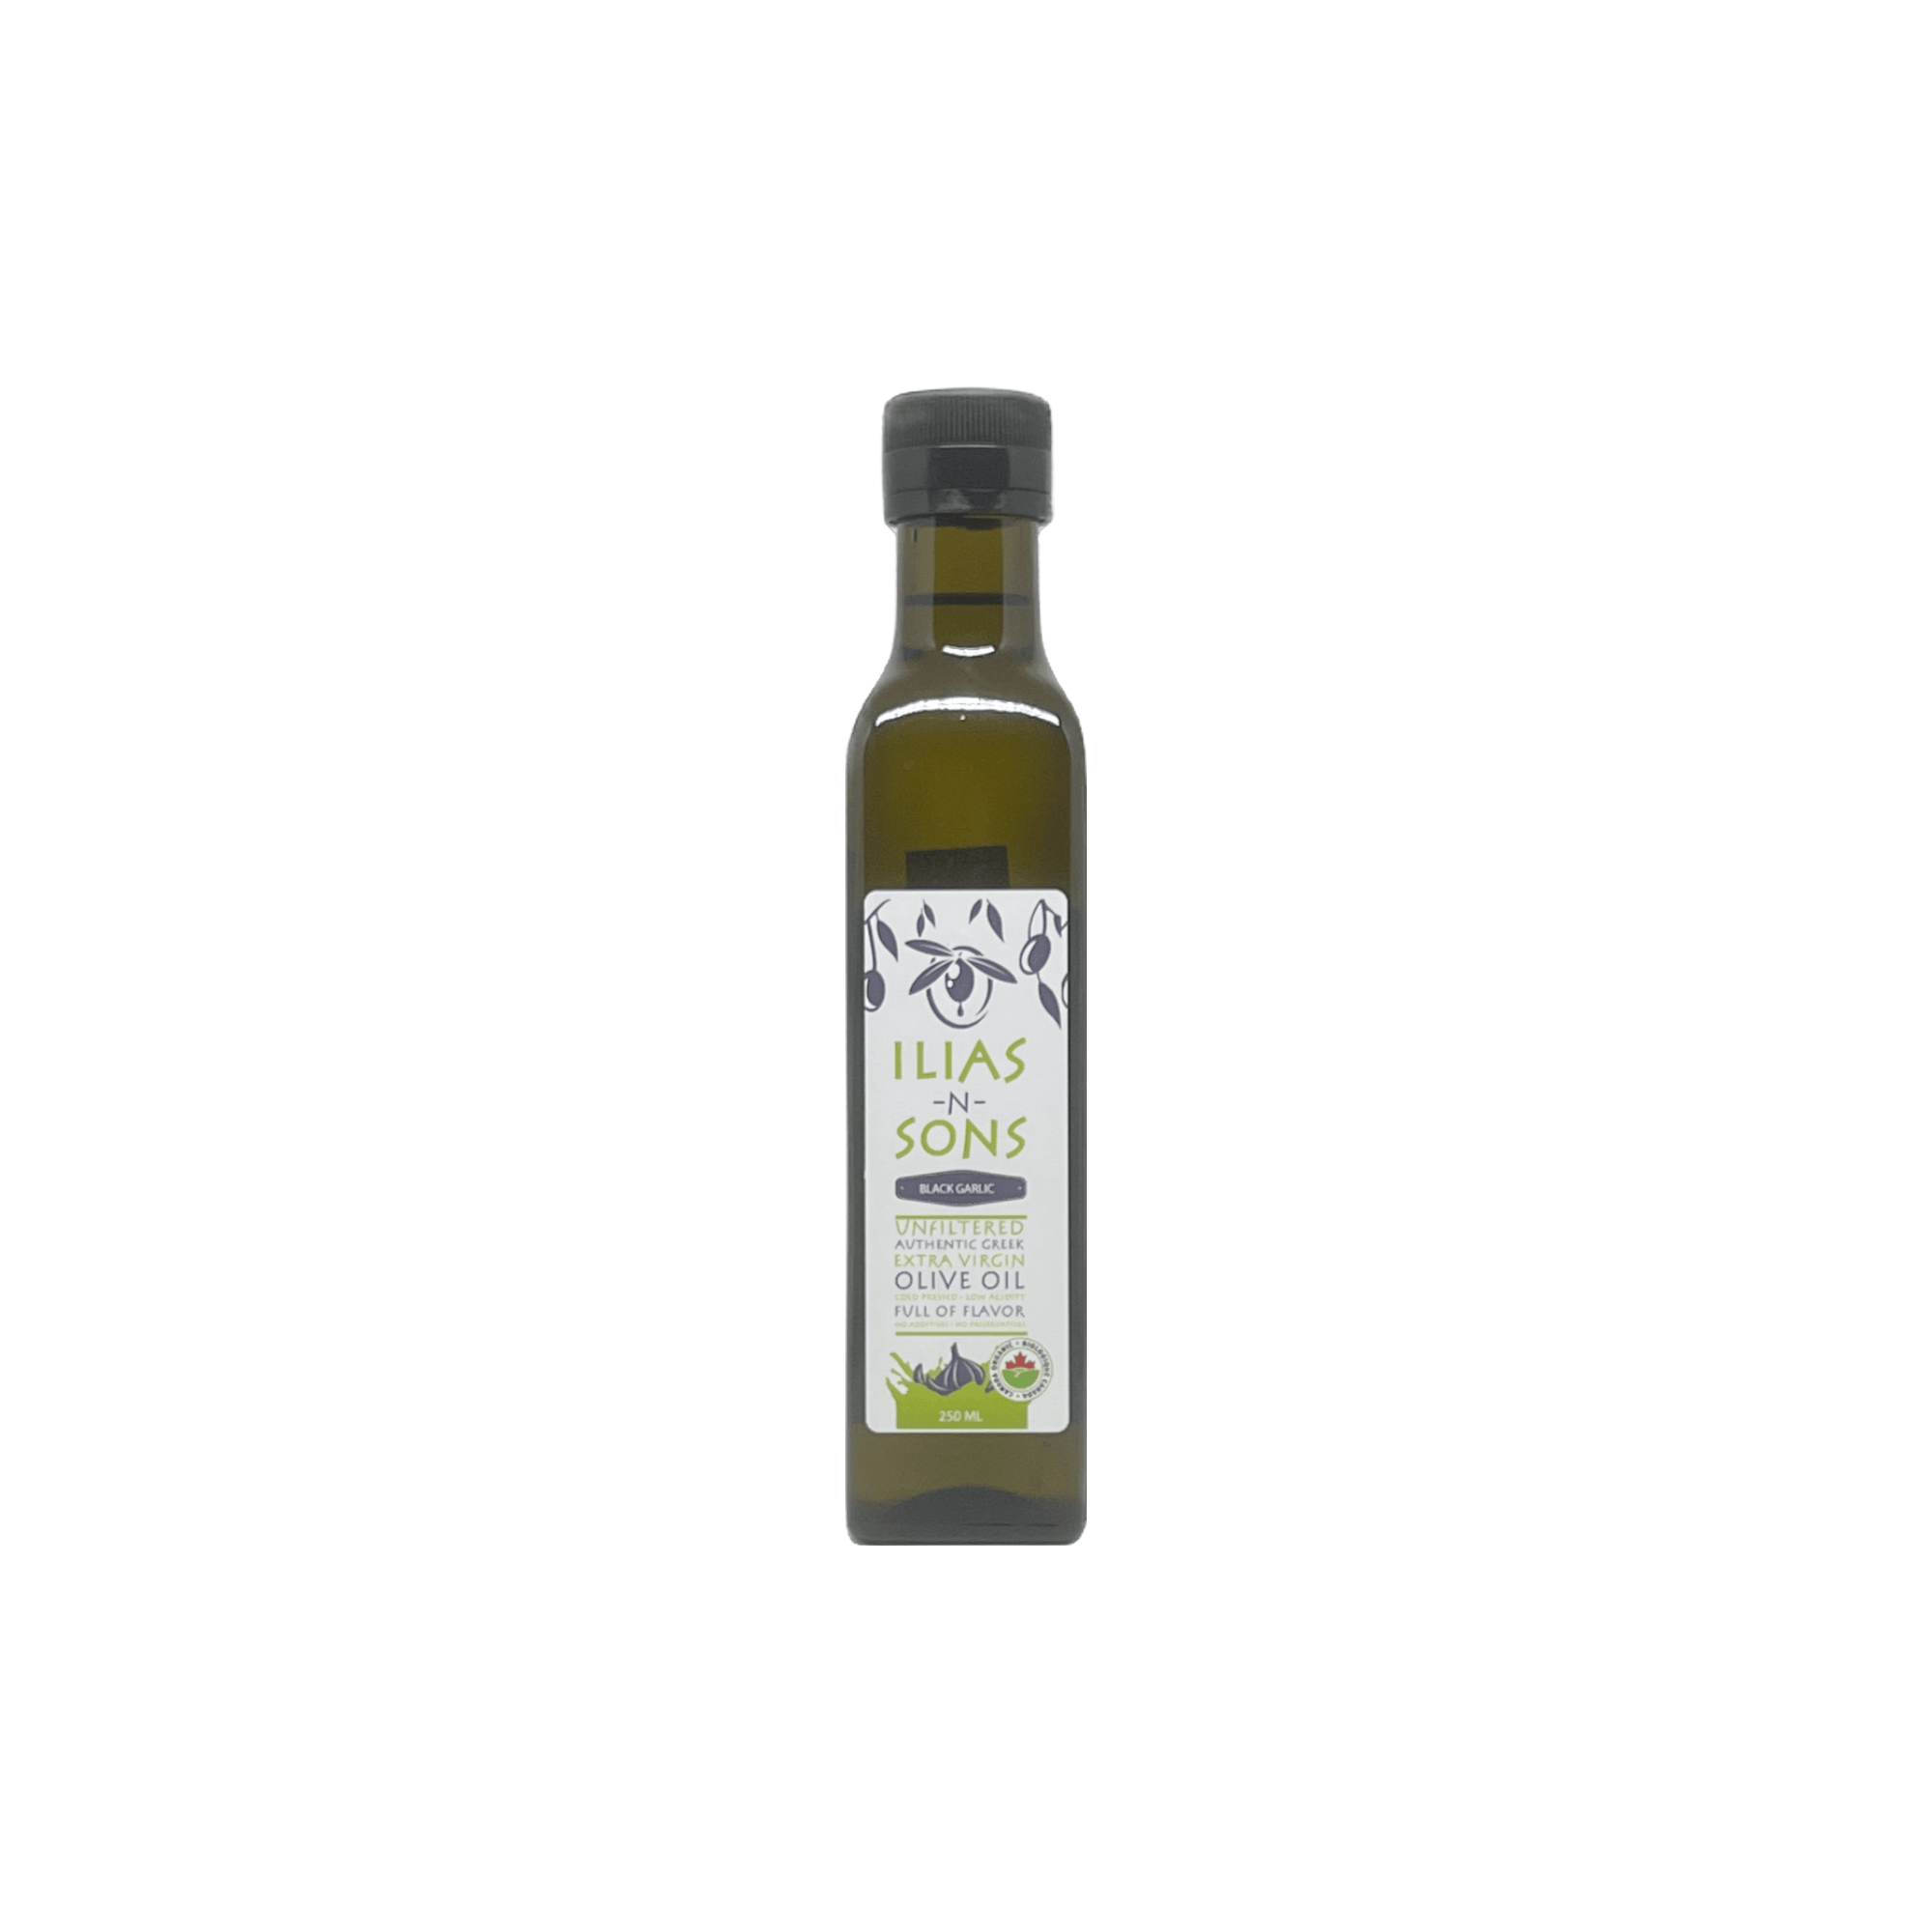 Gourmet Black Garlic Infused Organic Extra Virgin Olive Oil bottle displayed against a white backdrop